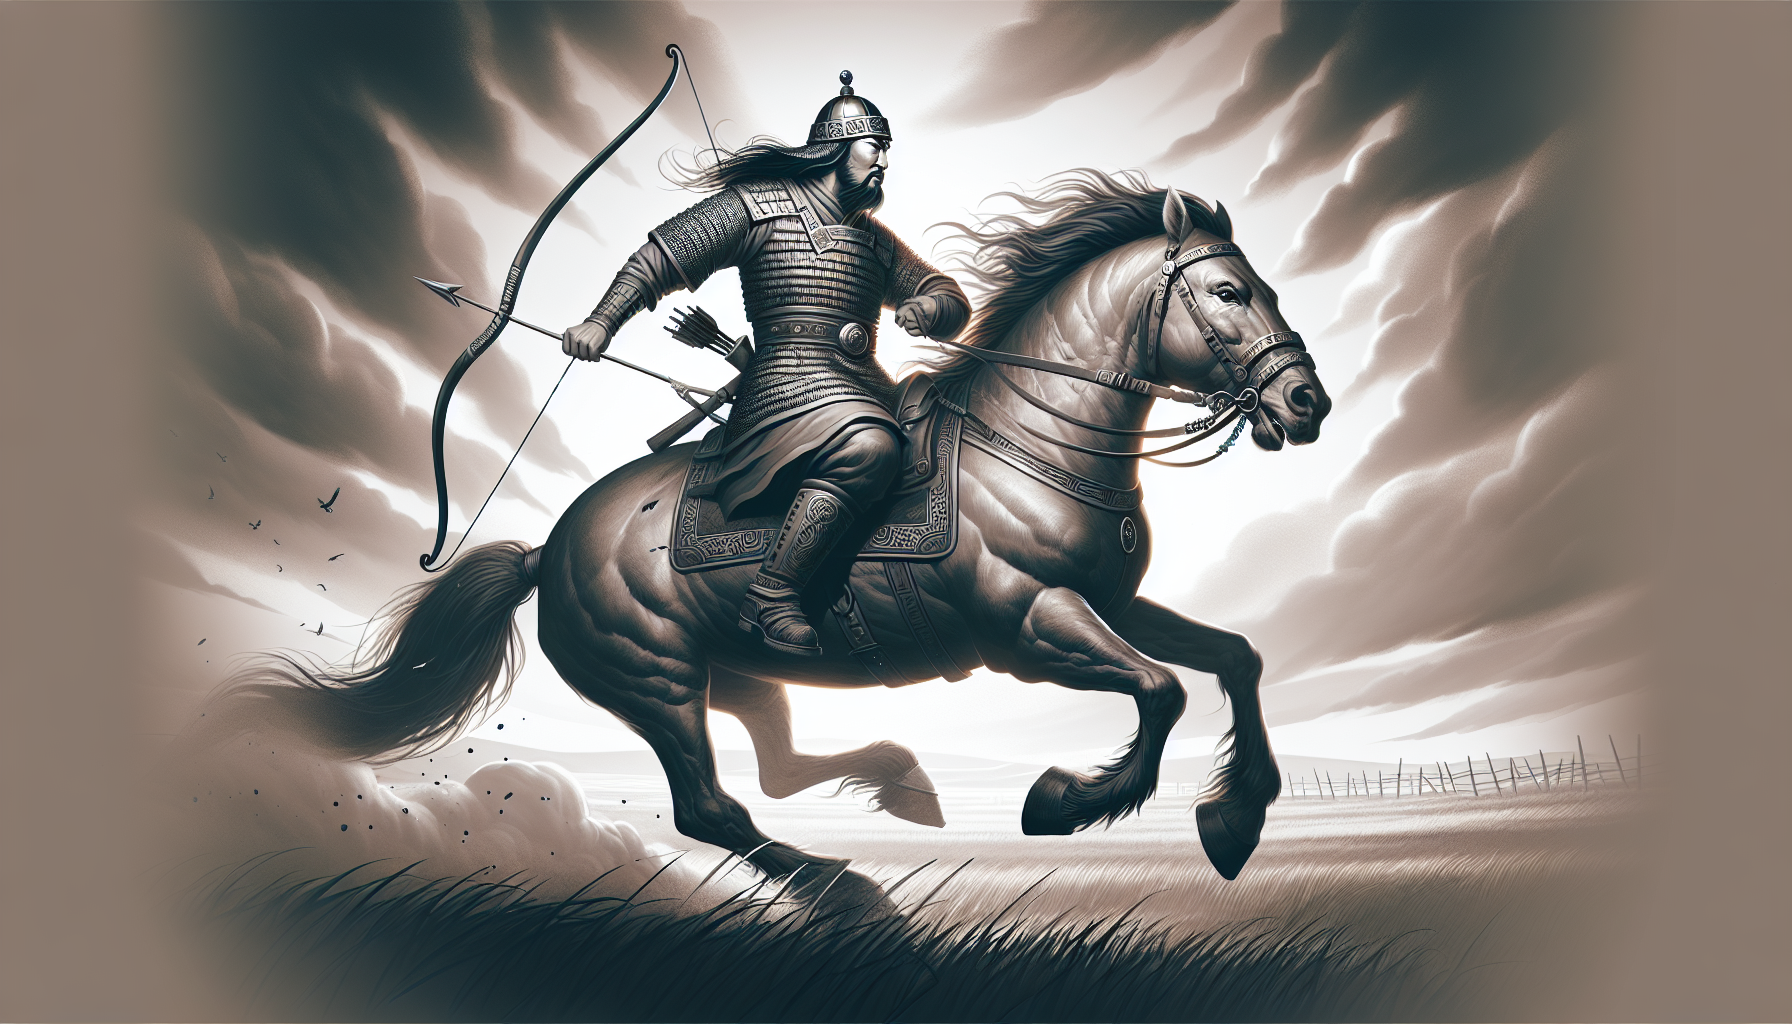 Illustration of a Mongol warrior on horseback leading a charge